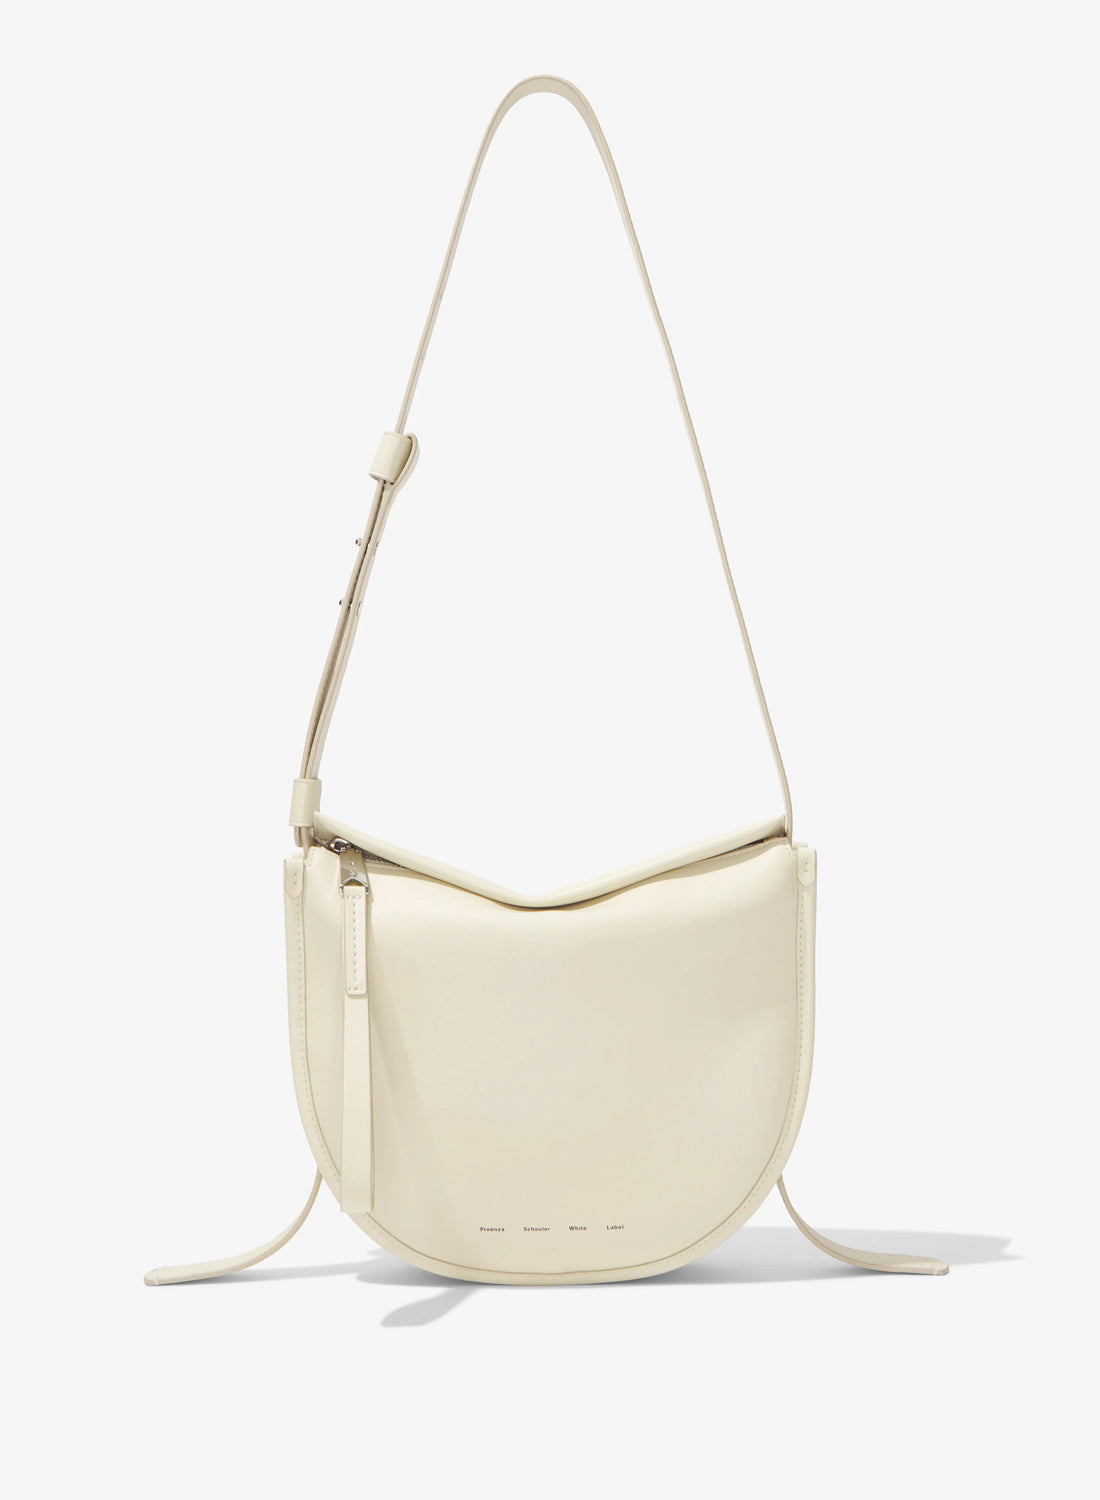 Proenza Schouler White Label Medium Baxter Bag In Leather Ivory